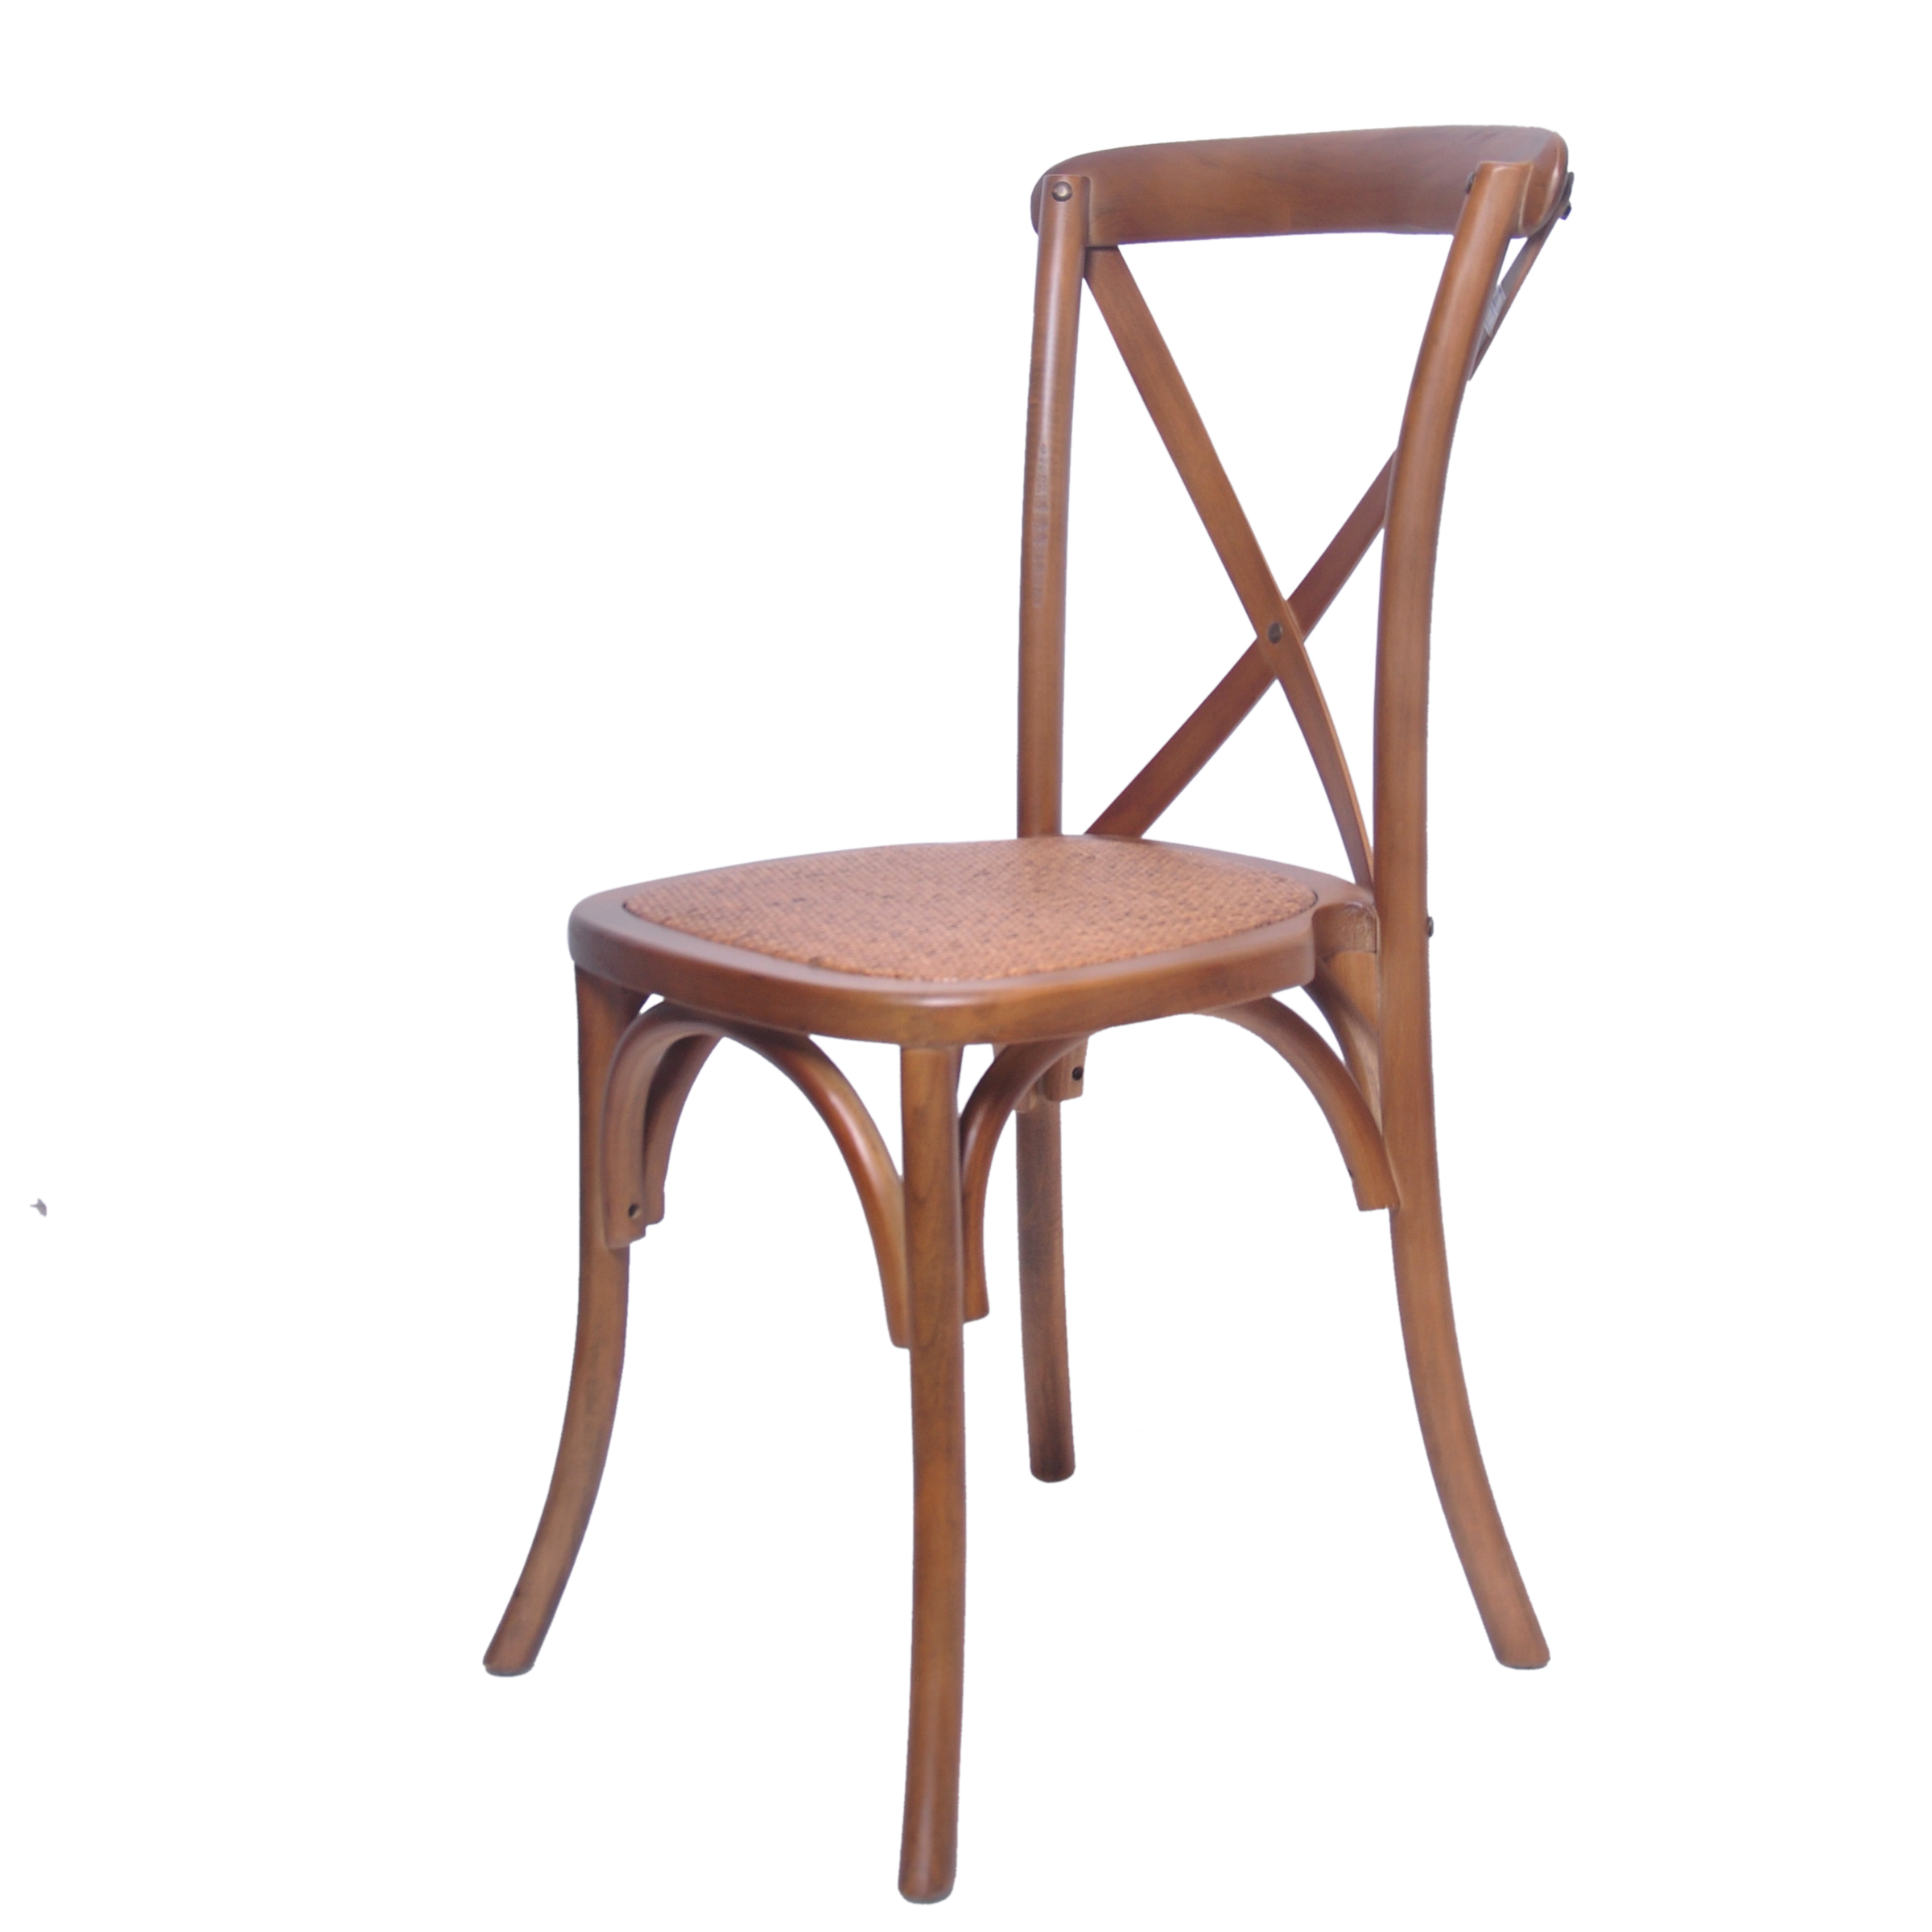 Lucca X-back wood chair